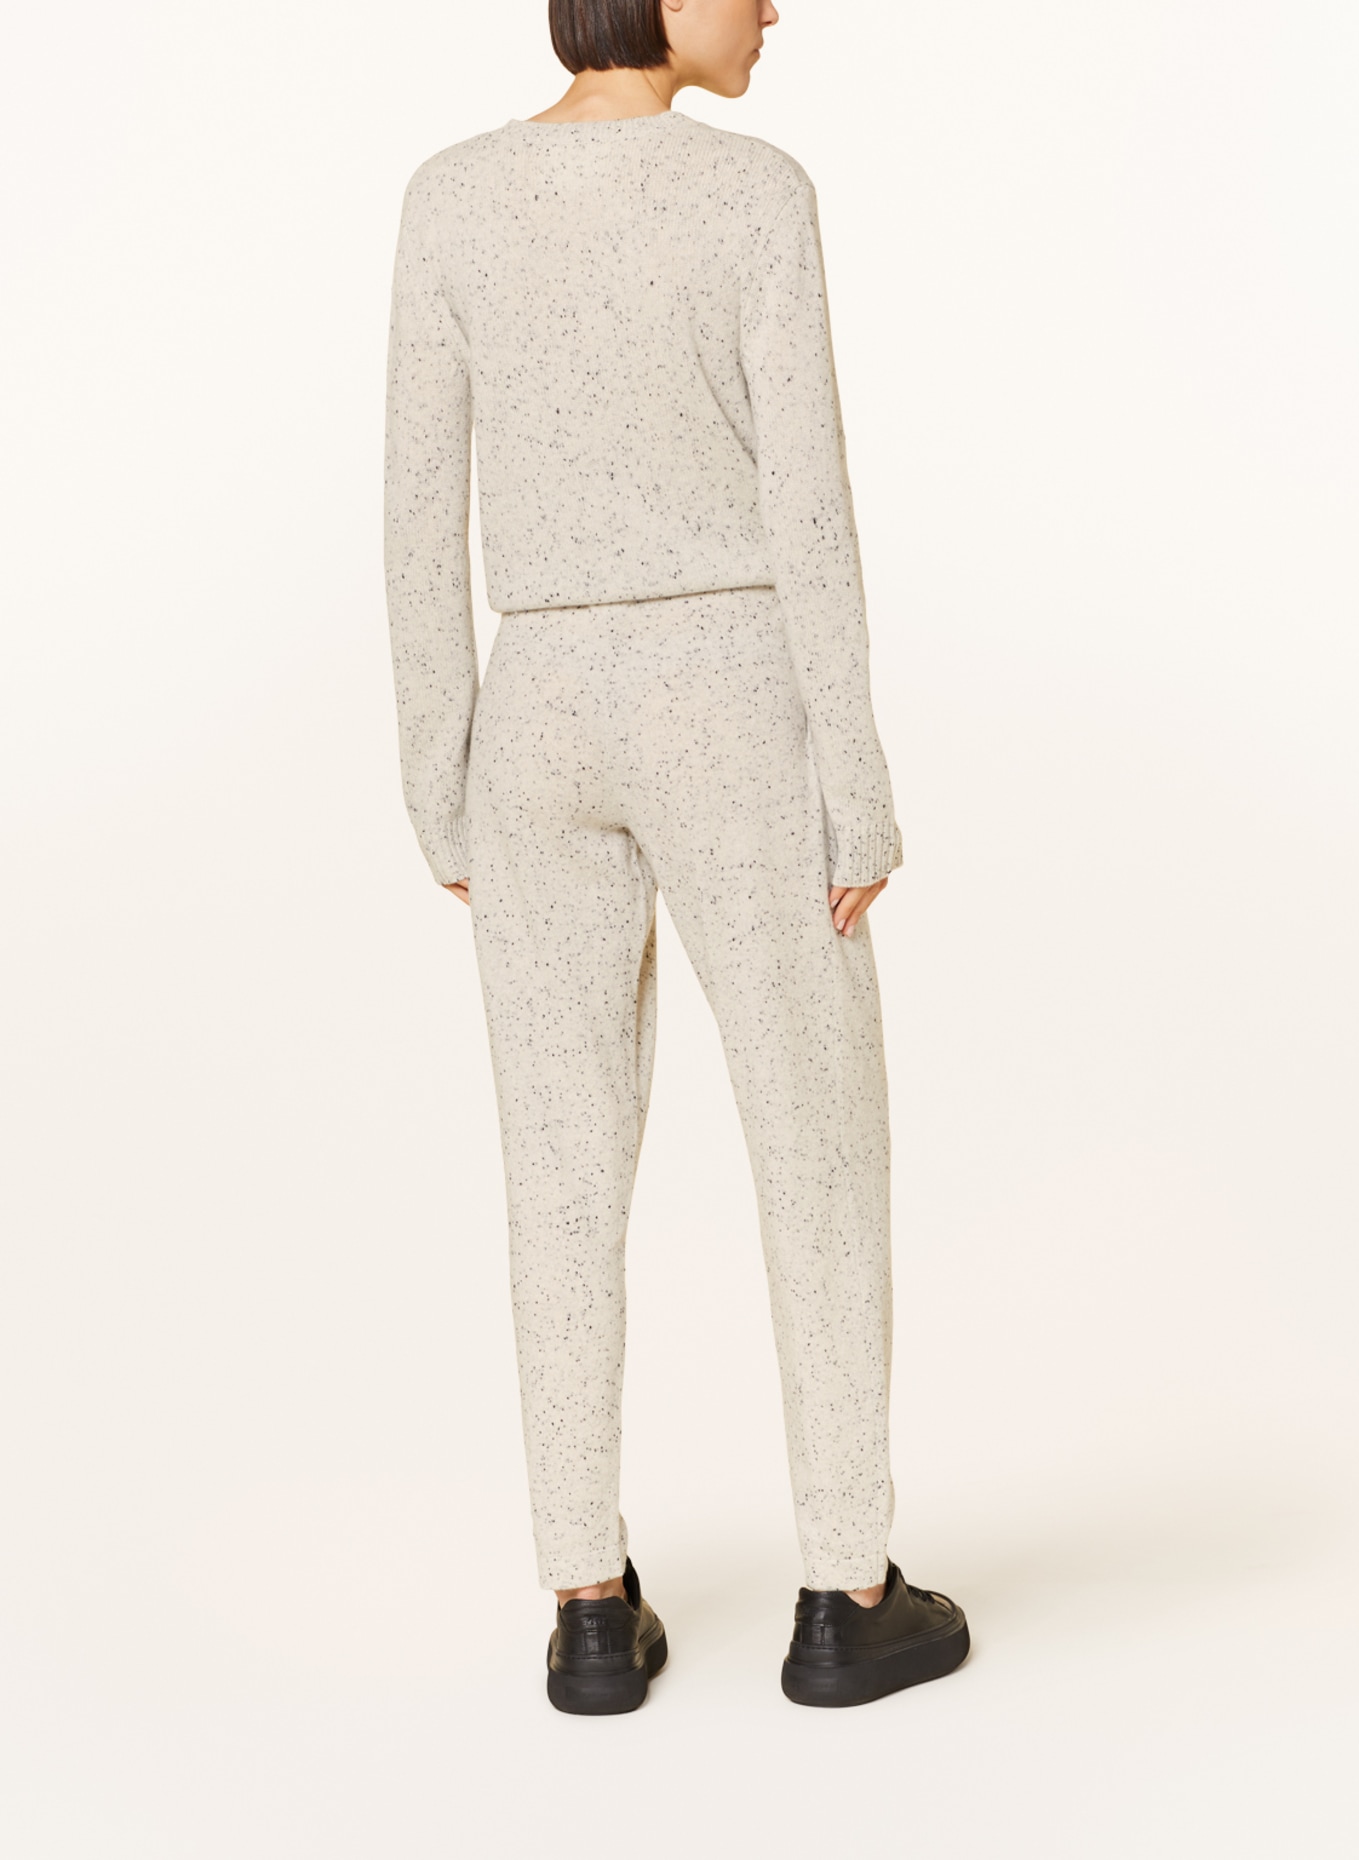 LISA YANG Knit trousers JO made of cashmere in jogger style, Color: LIGHT GRAY/ DARK GRAY (Image 3)